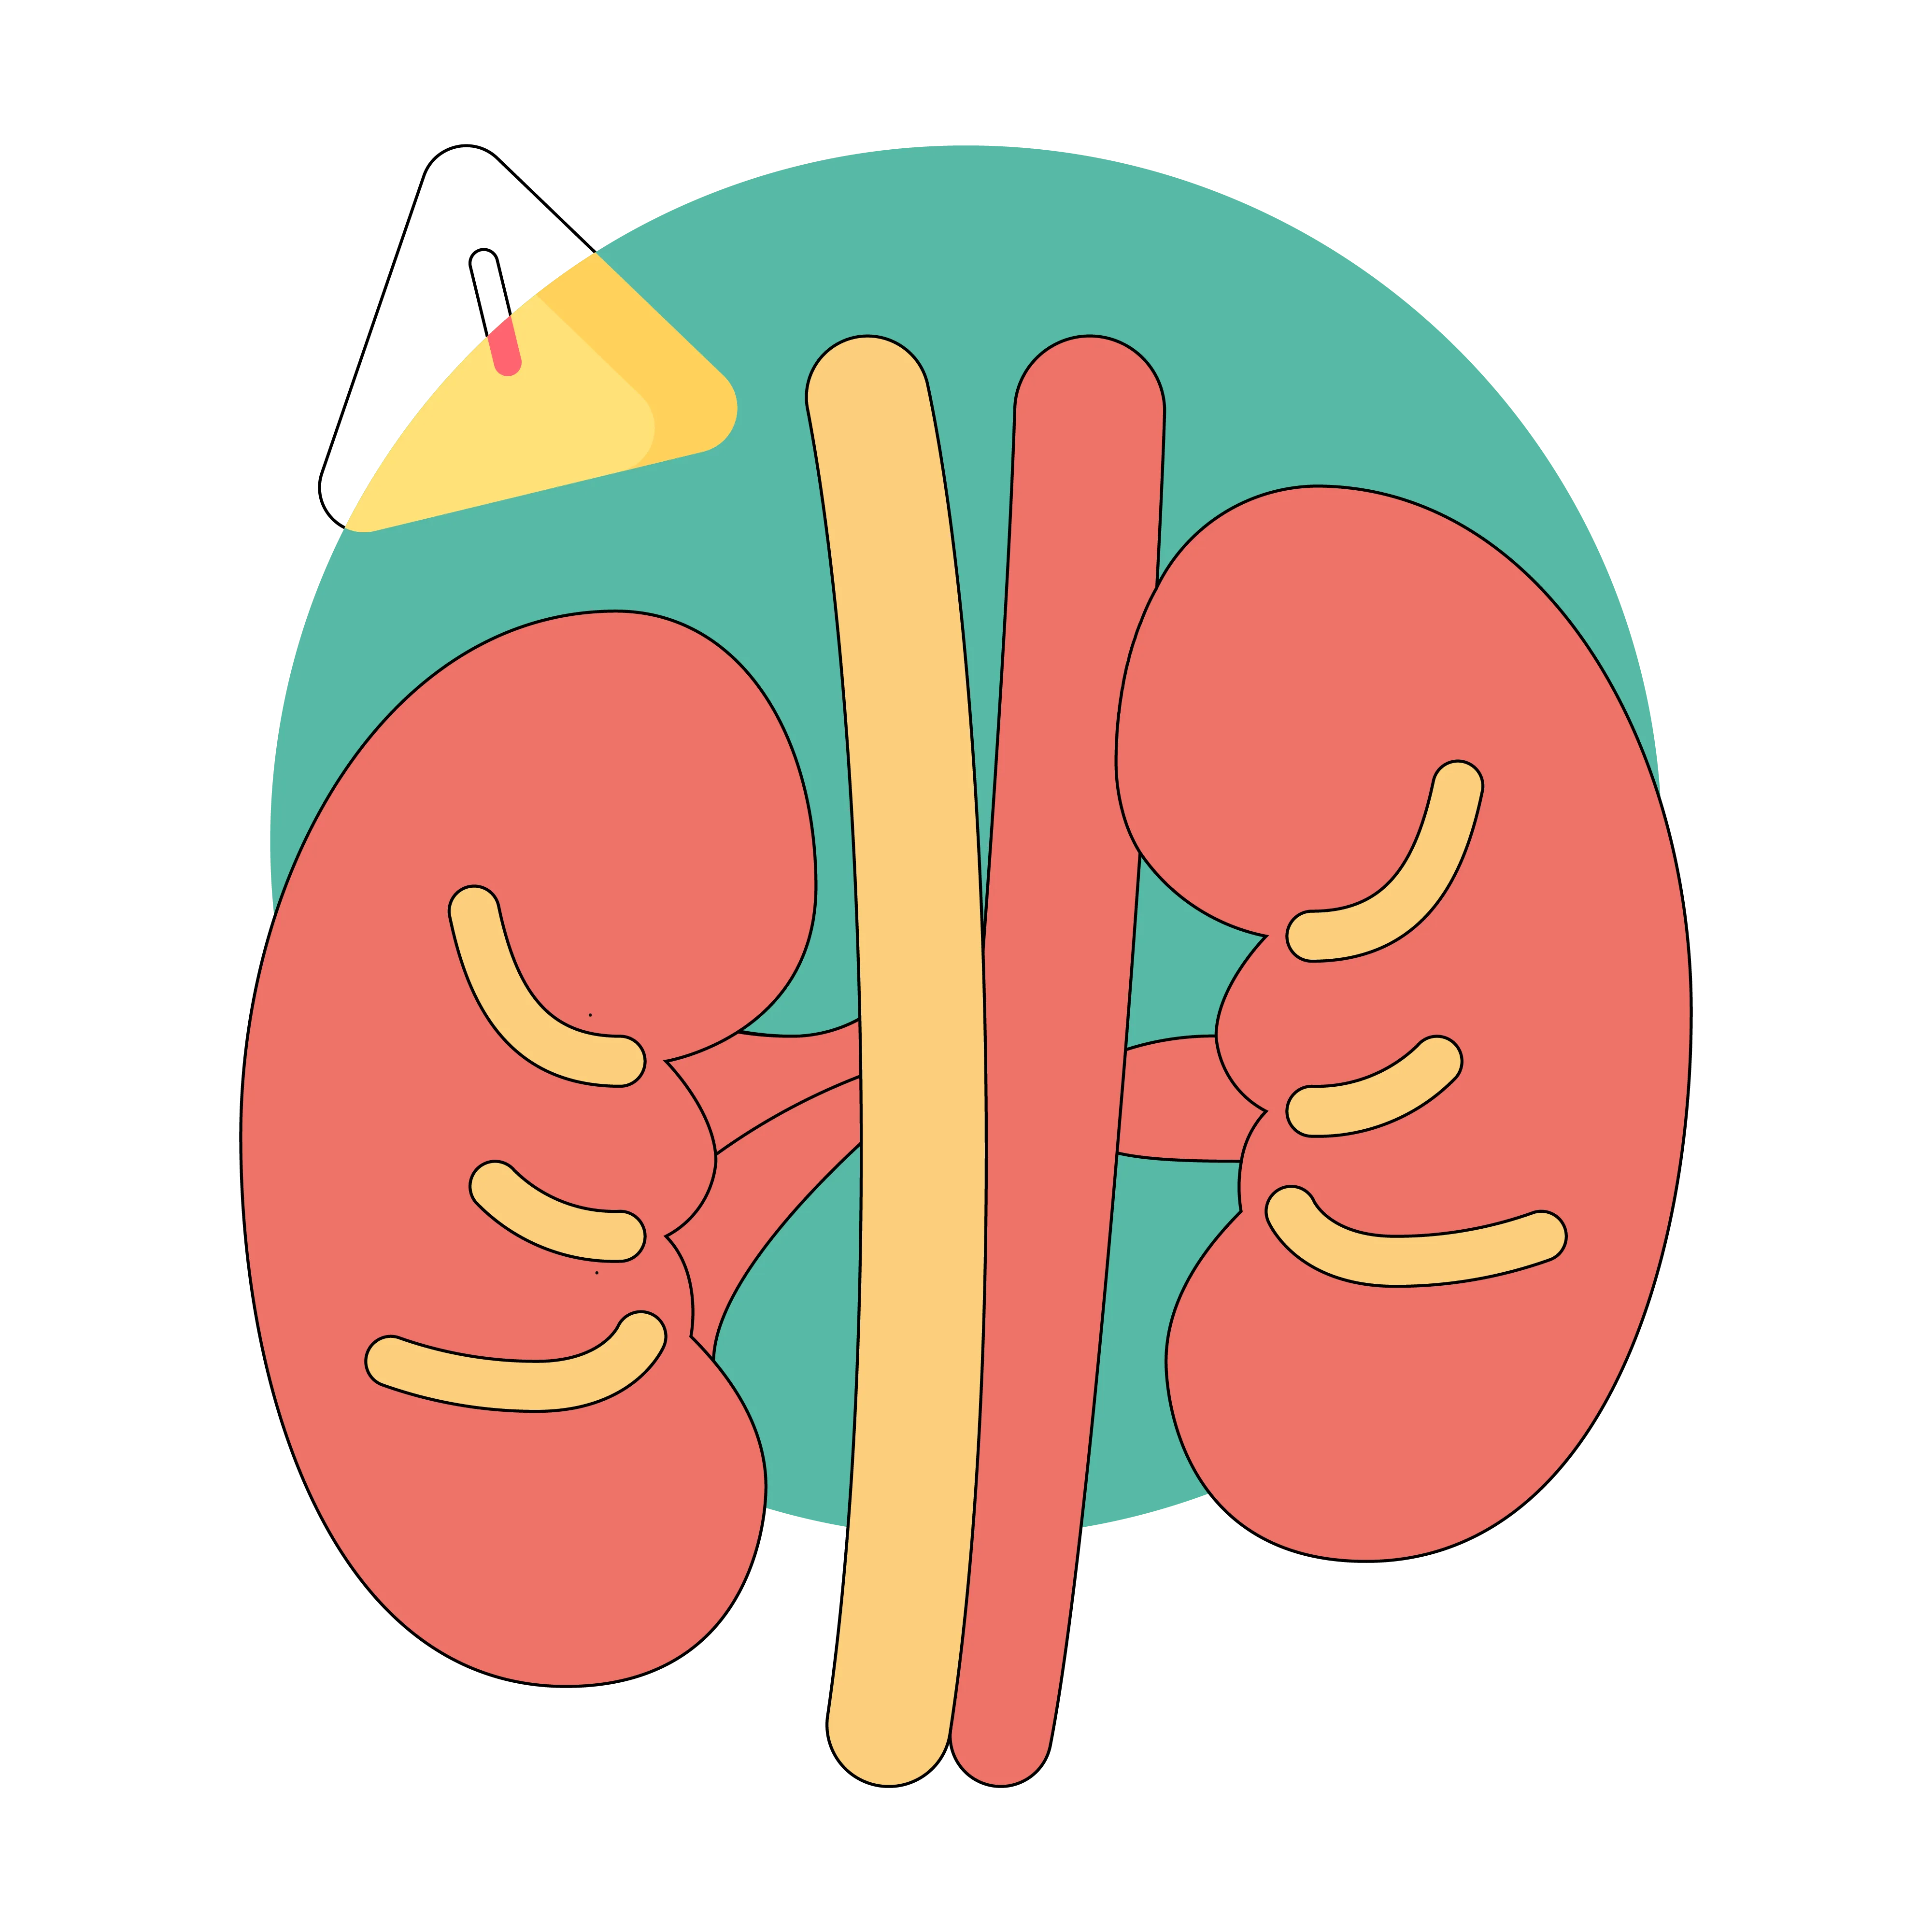 Kidney Failure: Symptoms, Causes, Types and Stages